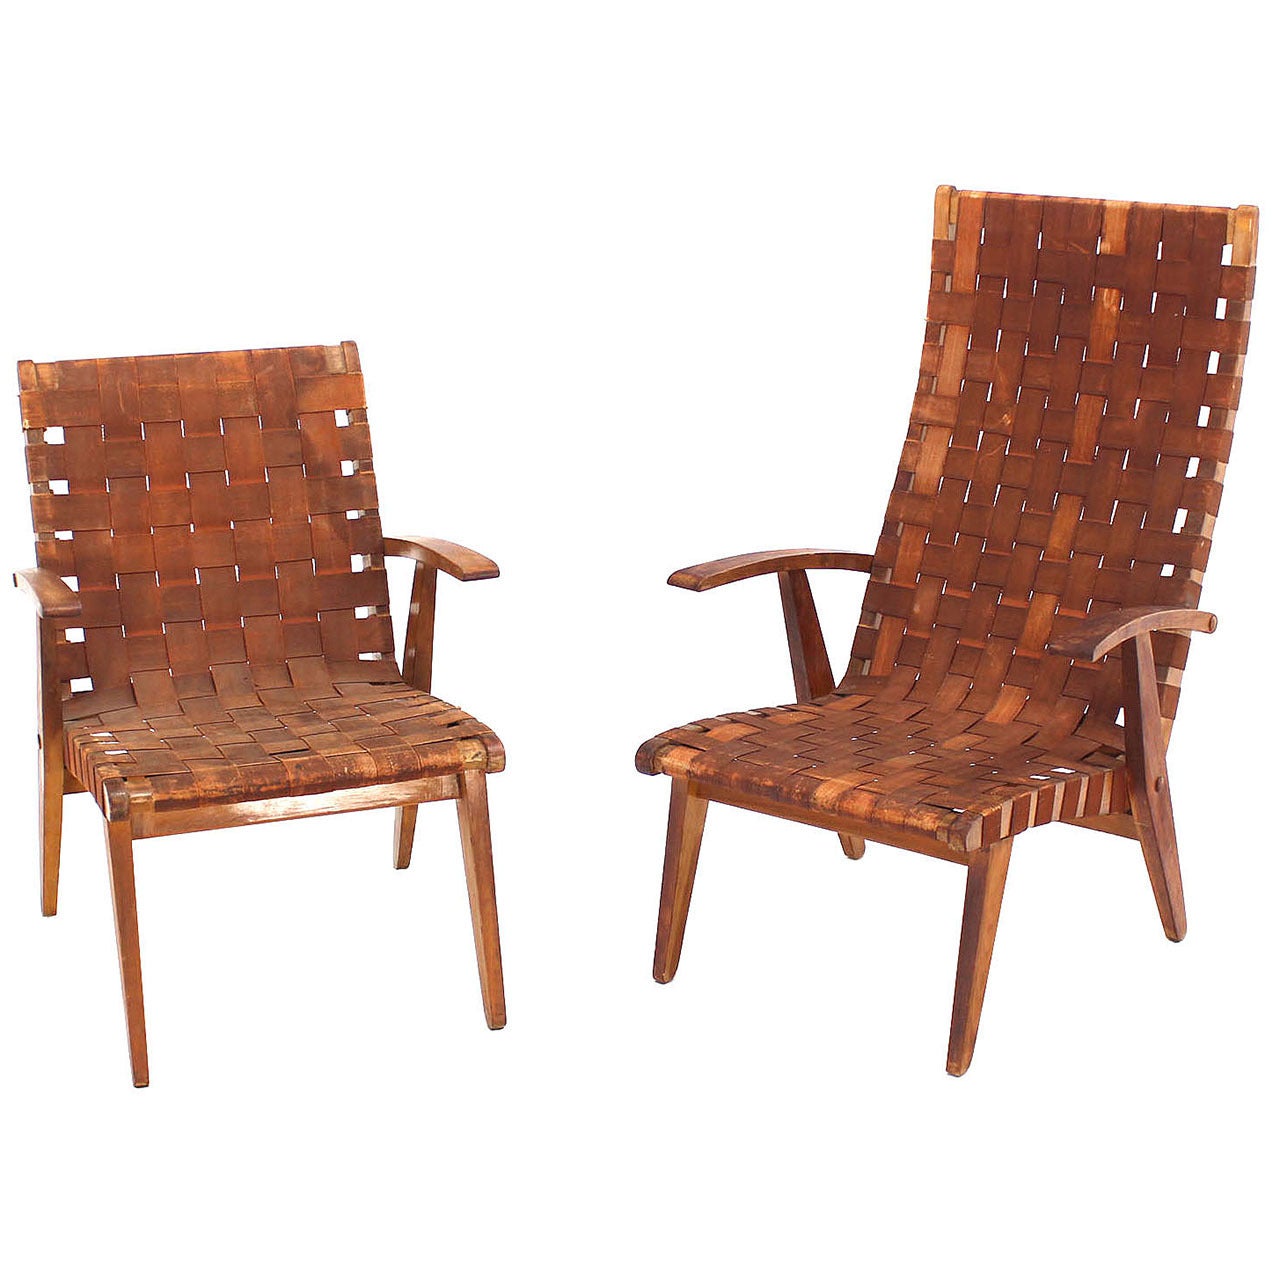 Non-Matching Pair of Early Jens Risom Lounge Chairs